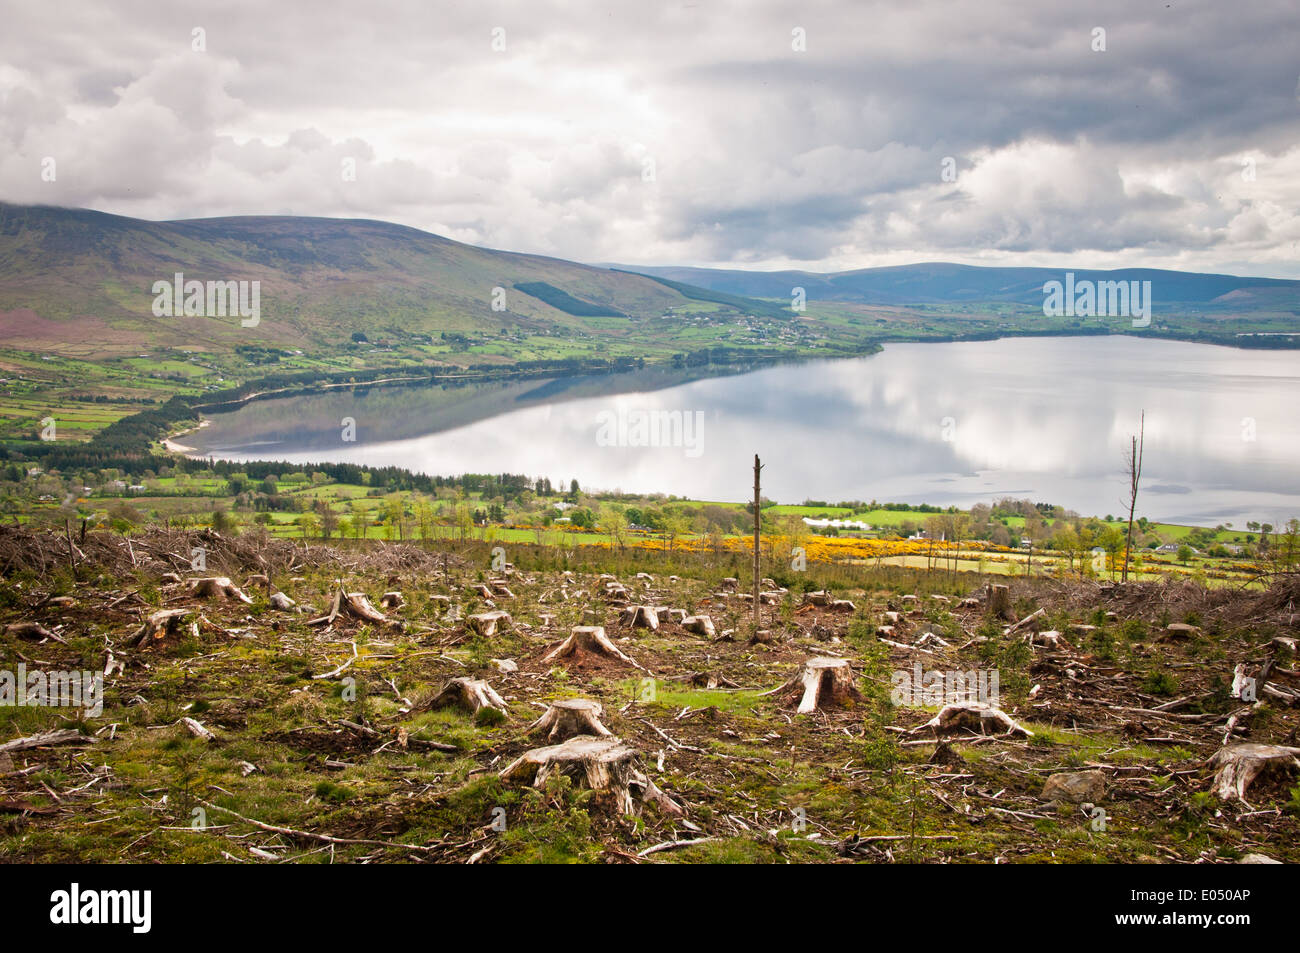 Harvested Forest overlooking Lake and Hills Stock Photo